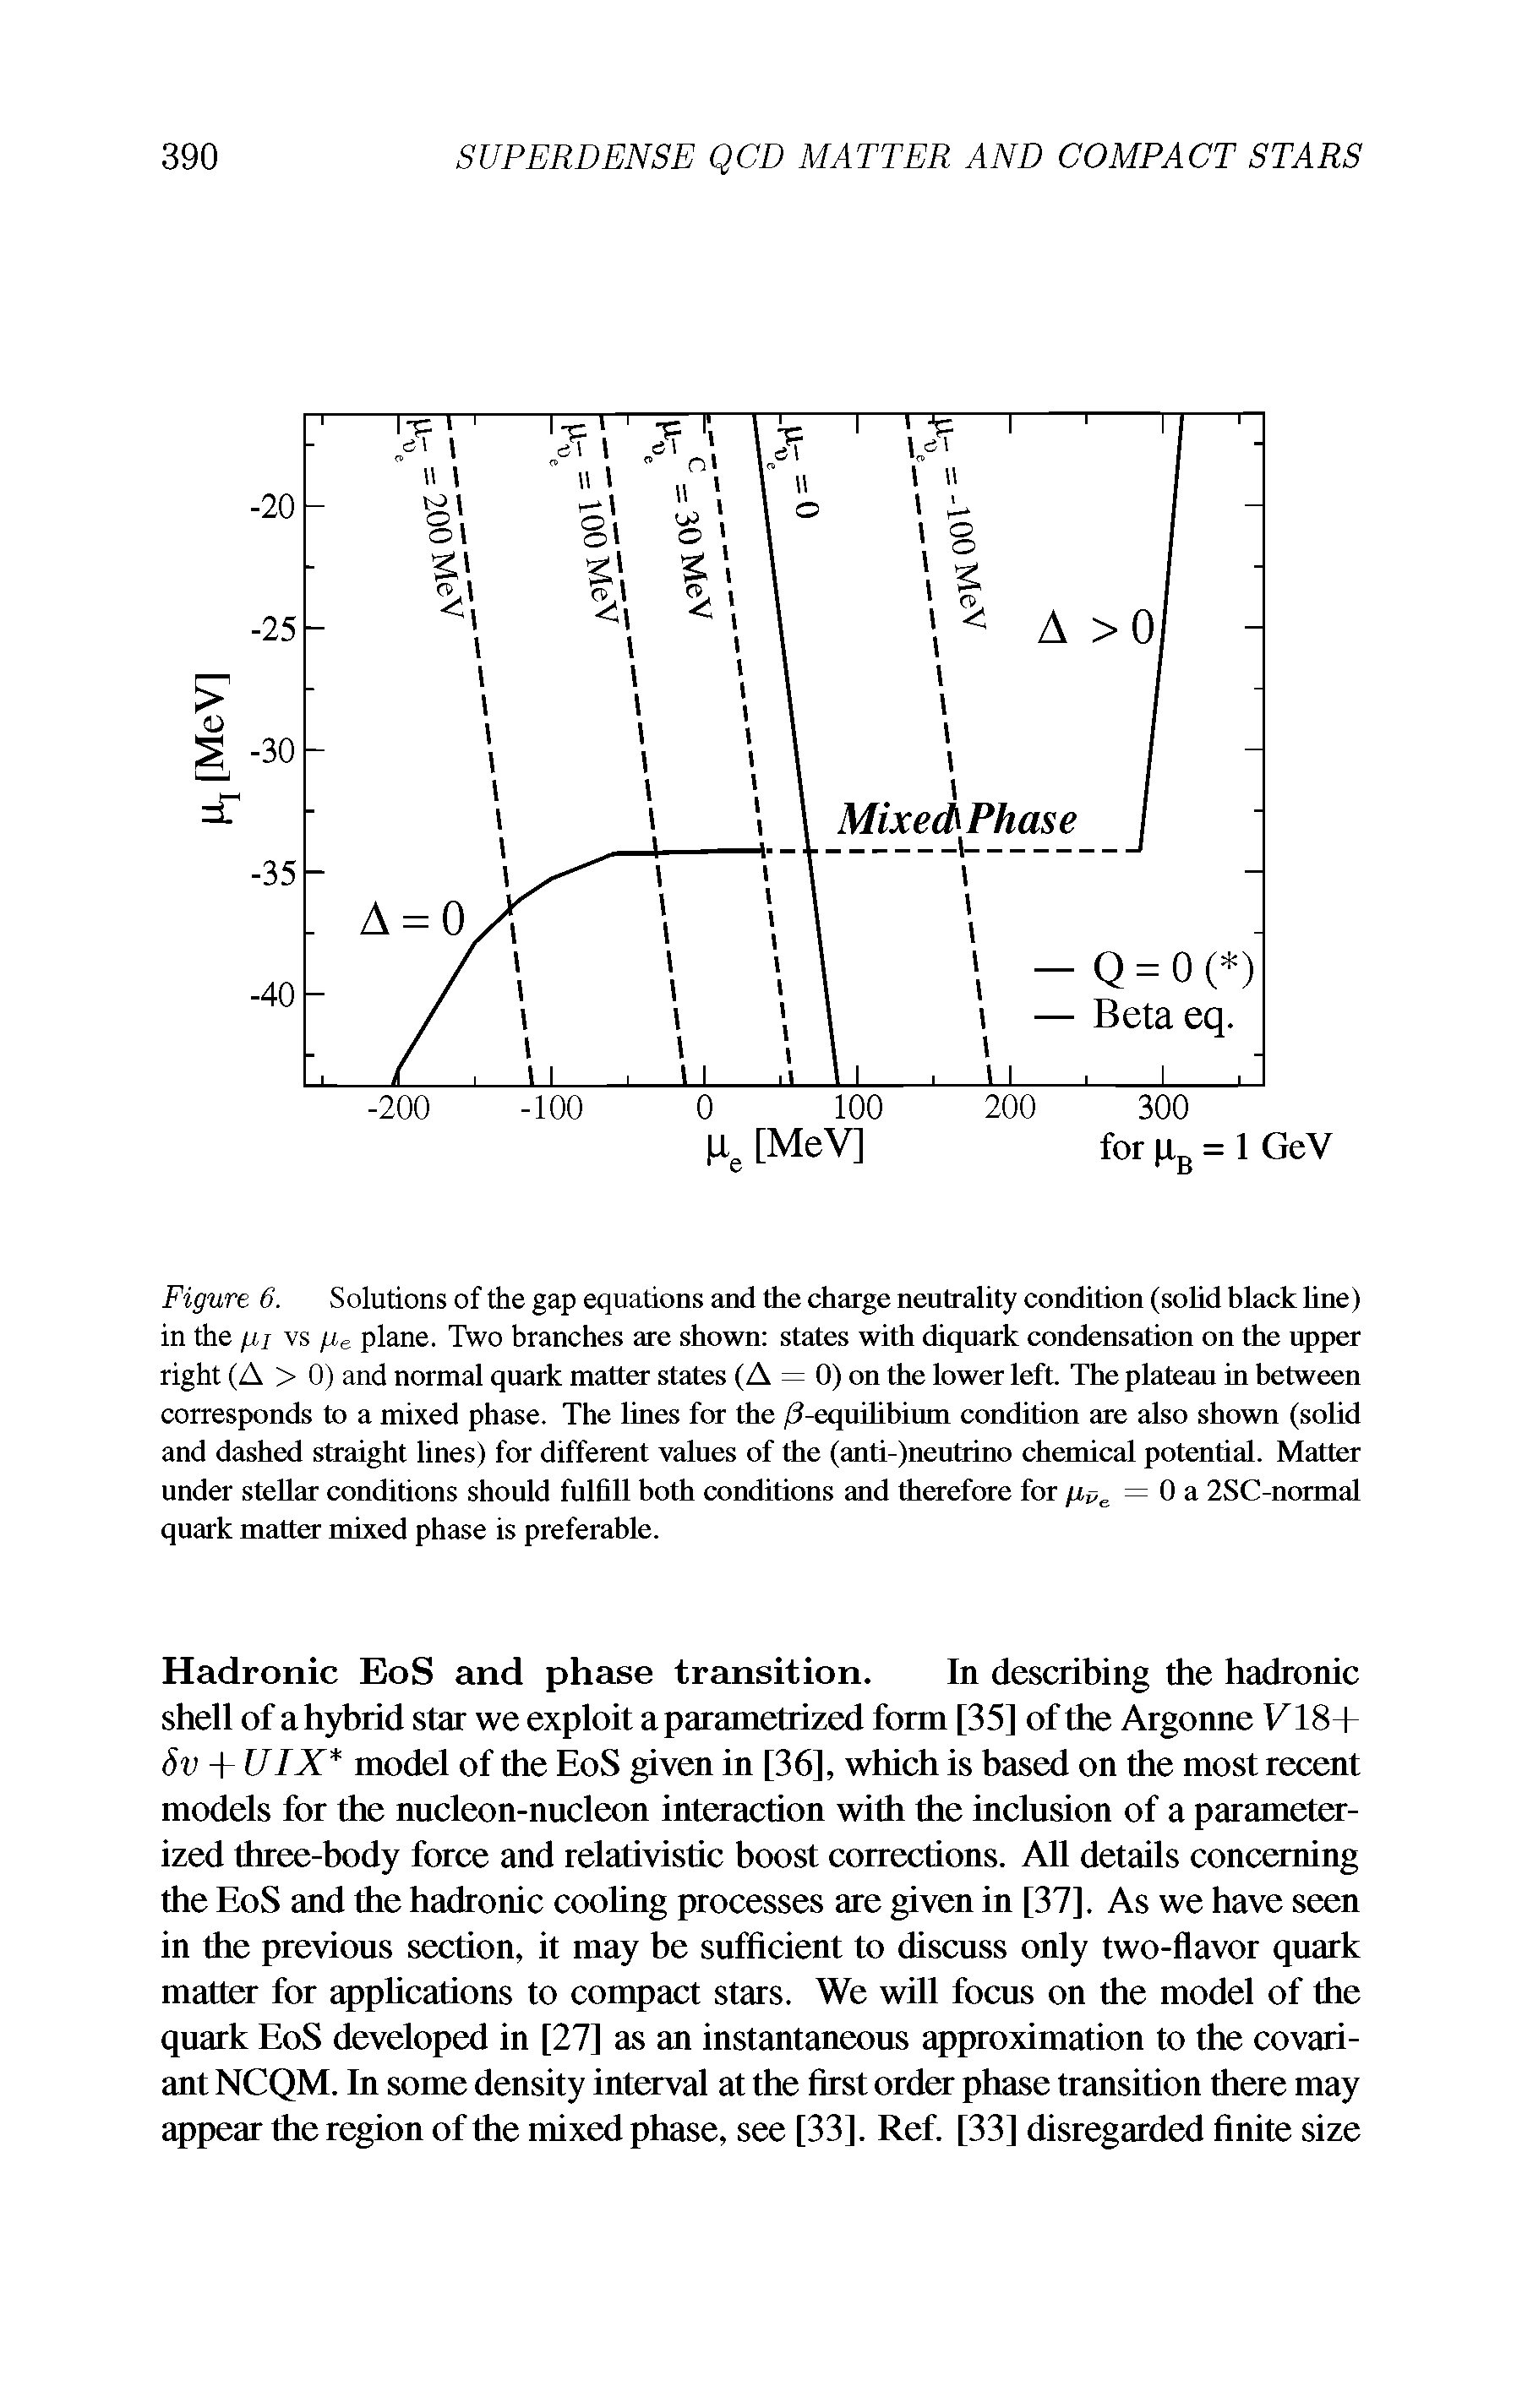 Figure 6. Solutions of the gap equations and the charge neutrality condition (solid black line) in the /// vs //, plane. Two branches are shown states with diquark condensation on the upper right (A > 0) and normal quark matter states (A = 0) on the lower left. The plateau in between corresponds to a mixed phase. The lines for the /3-equilibium condition are also shown (solid and dashed straight lines) for different values of the (anti-)neutrino chemical potential. Matter under stellar conditions should fulfill both conditions and therefore for //,( = 0 a 2SC-normal quark matter mixed phase is preferable.